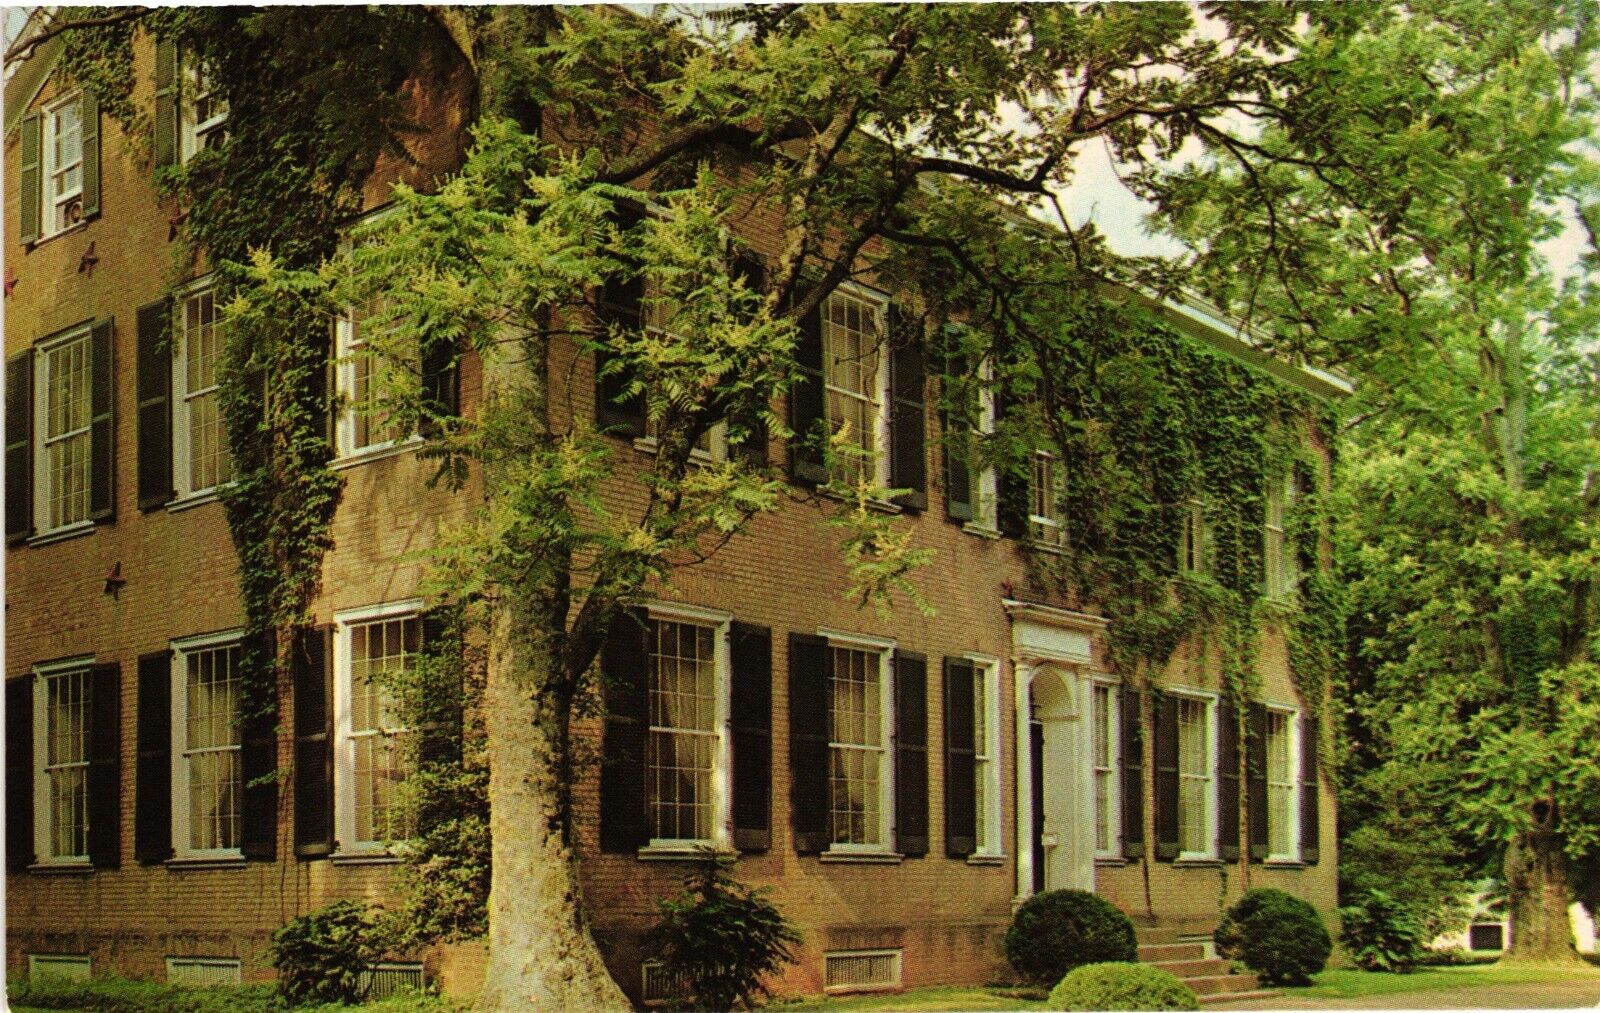 My Old Kentucky Home Bardstown Kentucky Vintage Postcard Un-Posted #1130